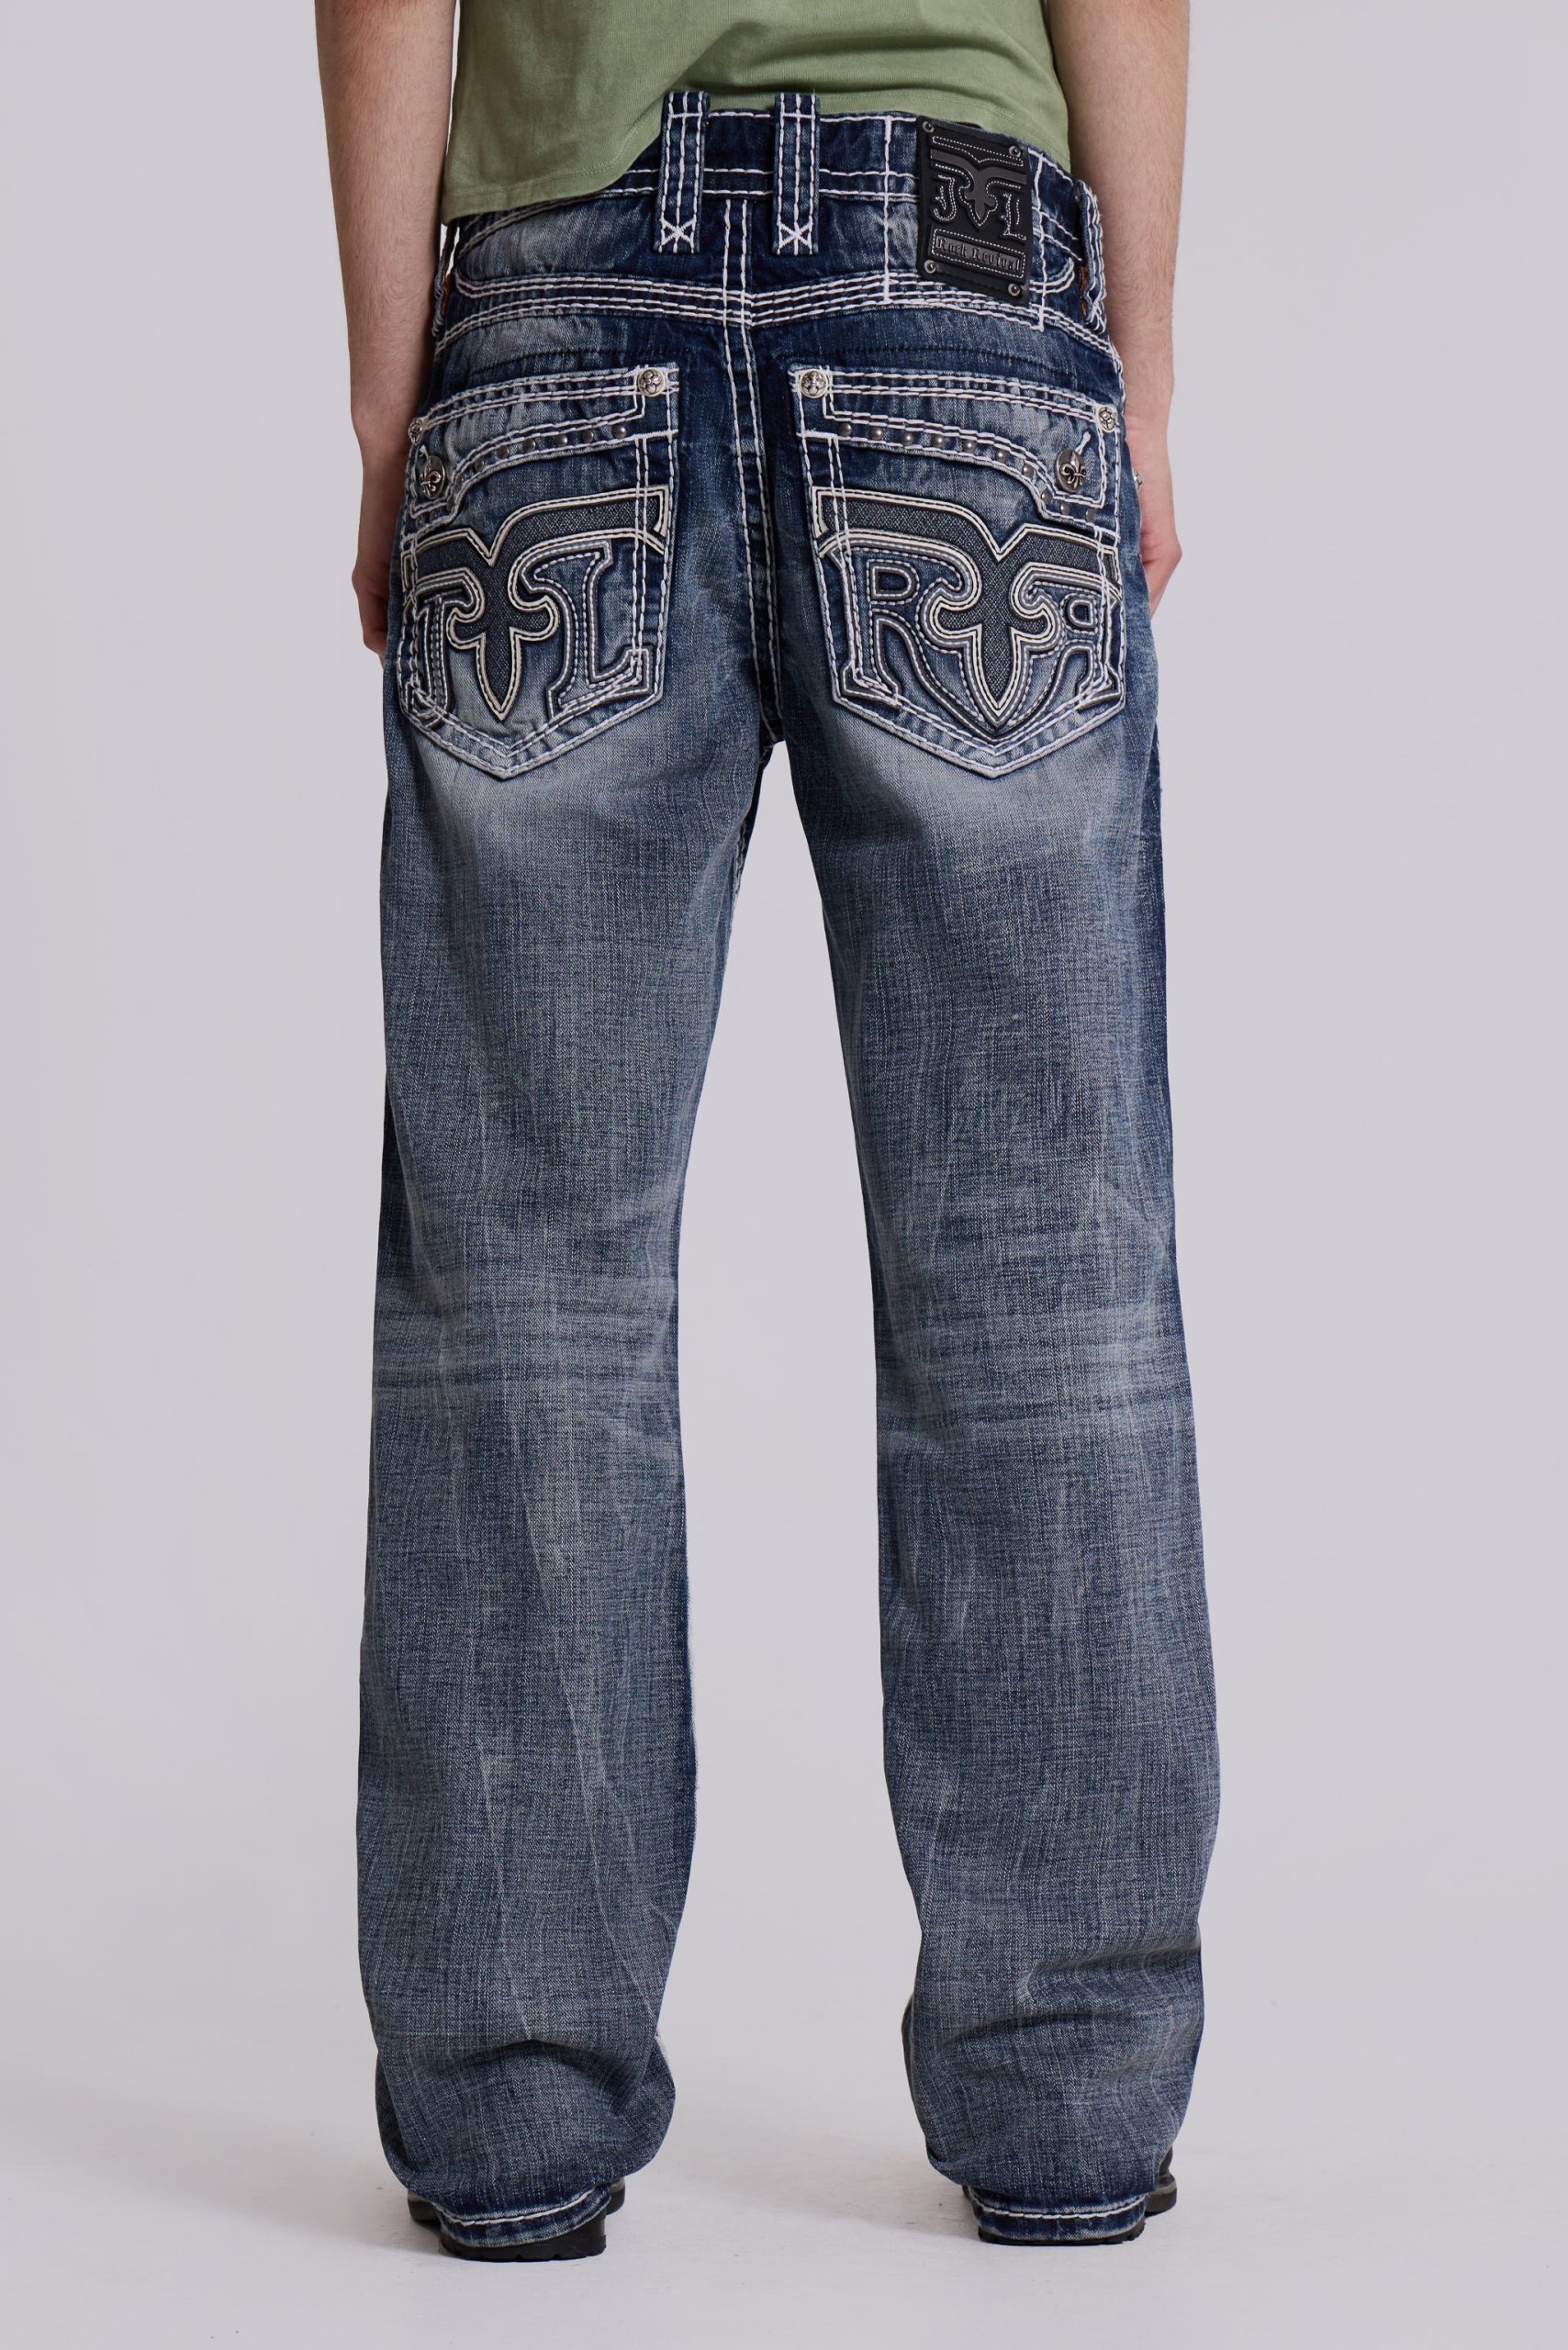 Rock revival bootcut jeans: Step Up Your Style Game with it缩略图